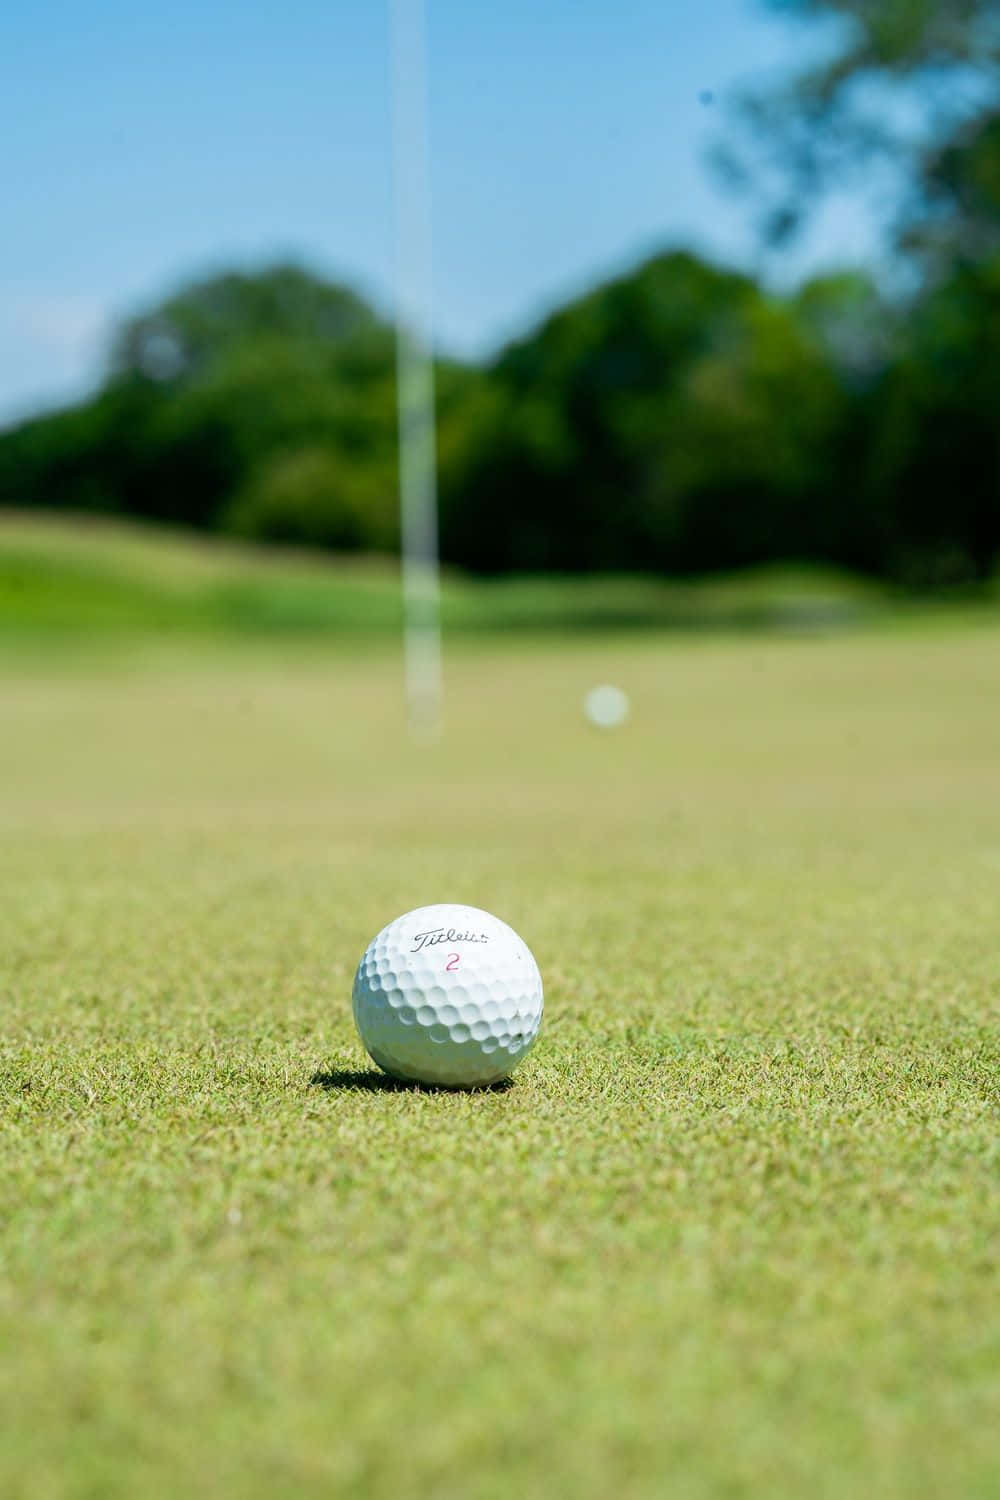 Play The Best Golf of Your Life at Awesome Golf Wallpaper